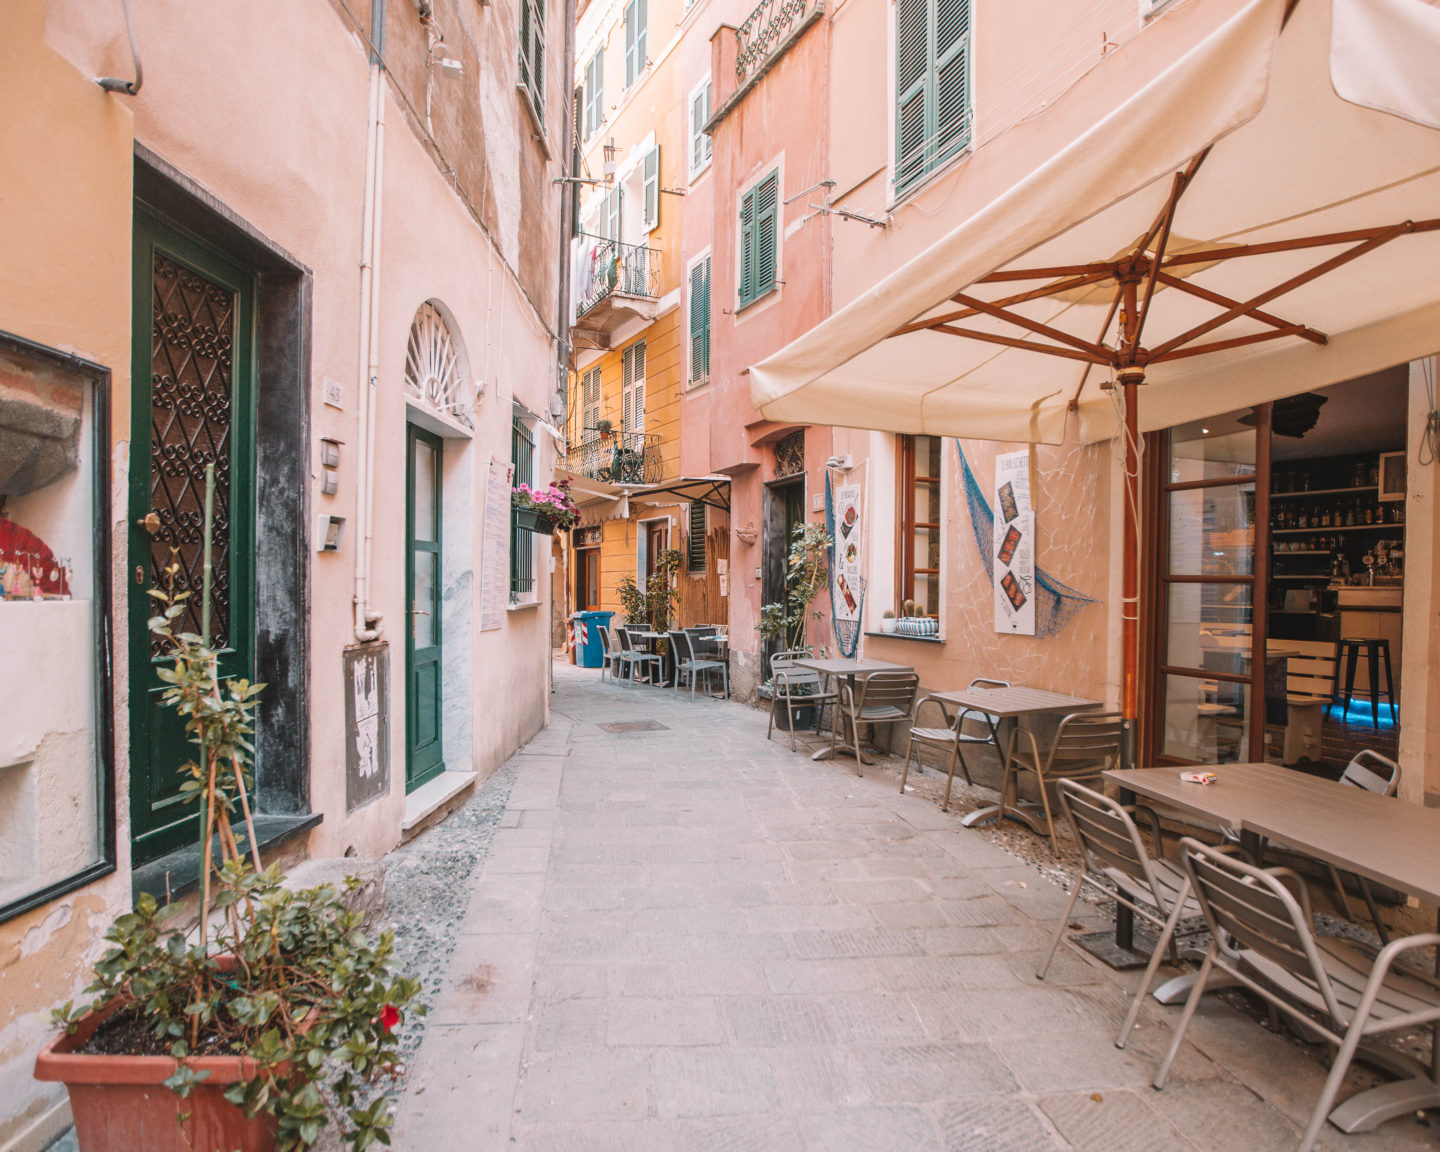 So, you're planning your trip to Cinque Terre. Look no further to find everything you need to know about where to stay in Cinque Terre!